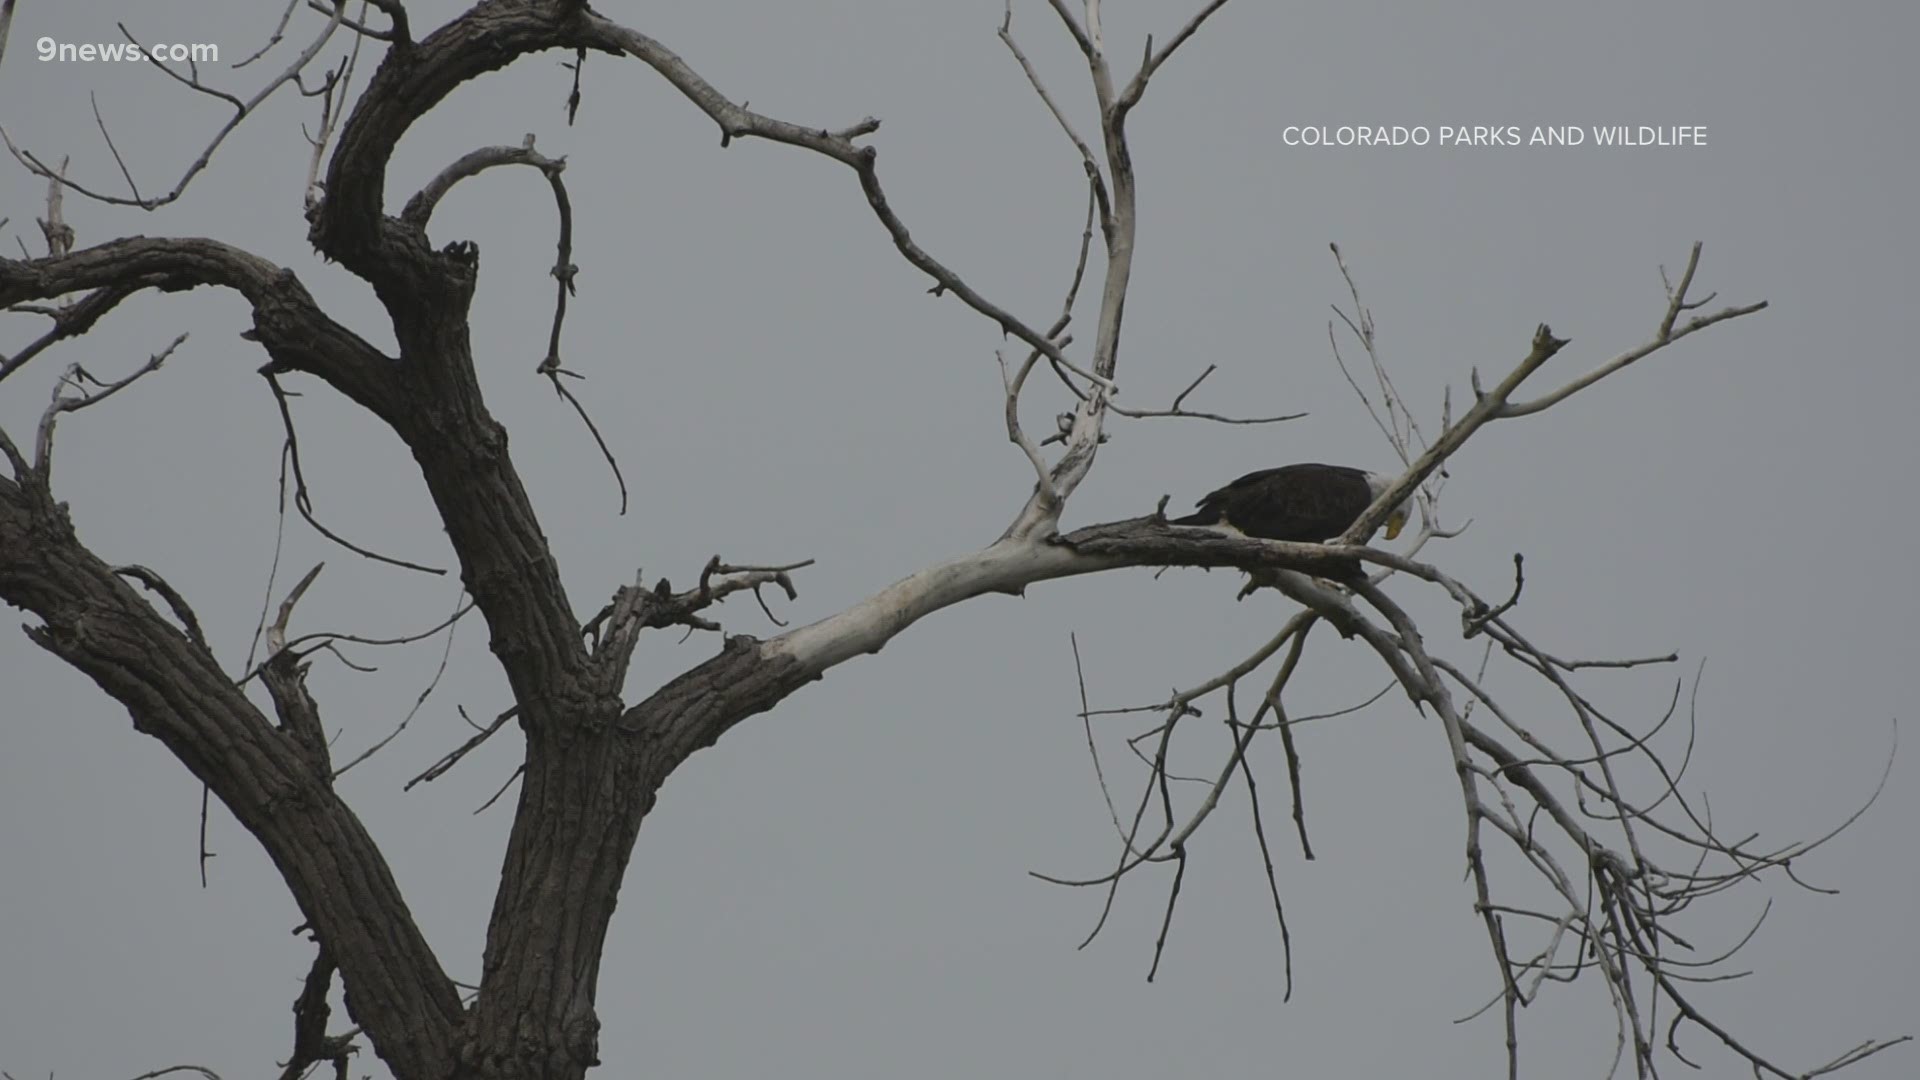 Colorado Parks and Wildlife begins its 4-year project study. It's tracking the eagle population and watching how the birds respond to rapid development.